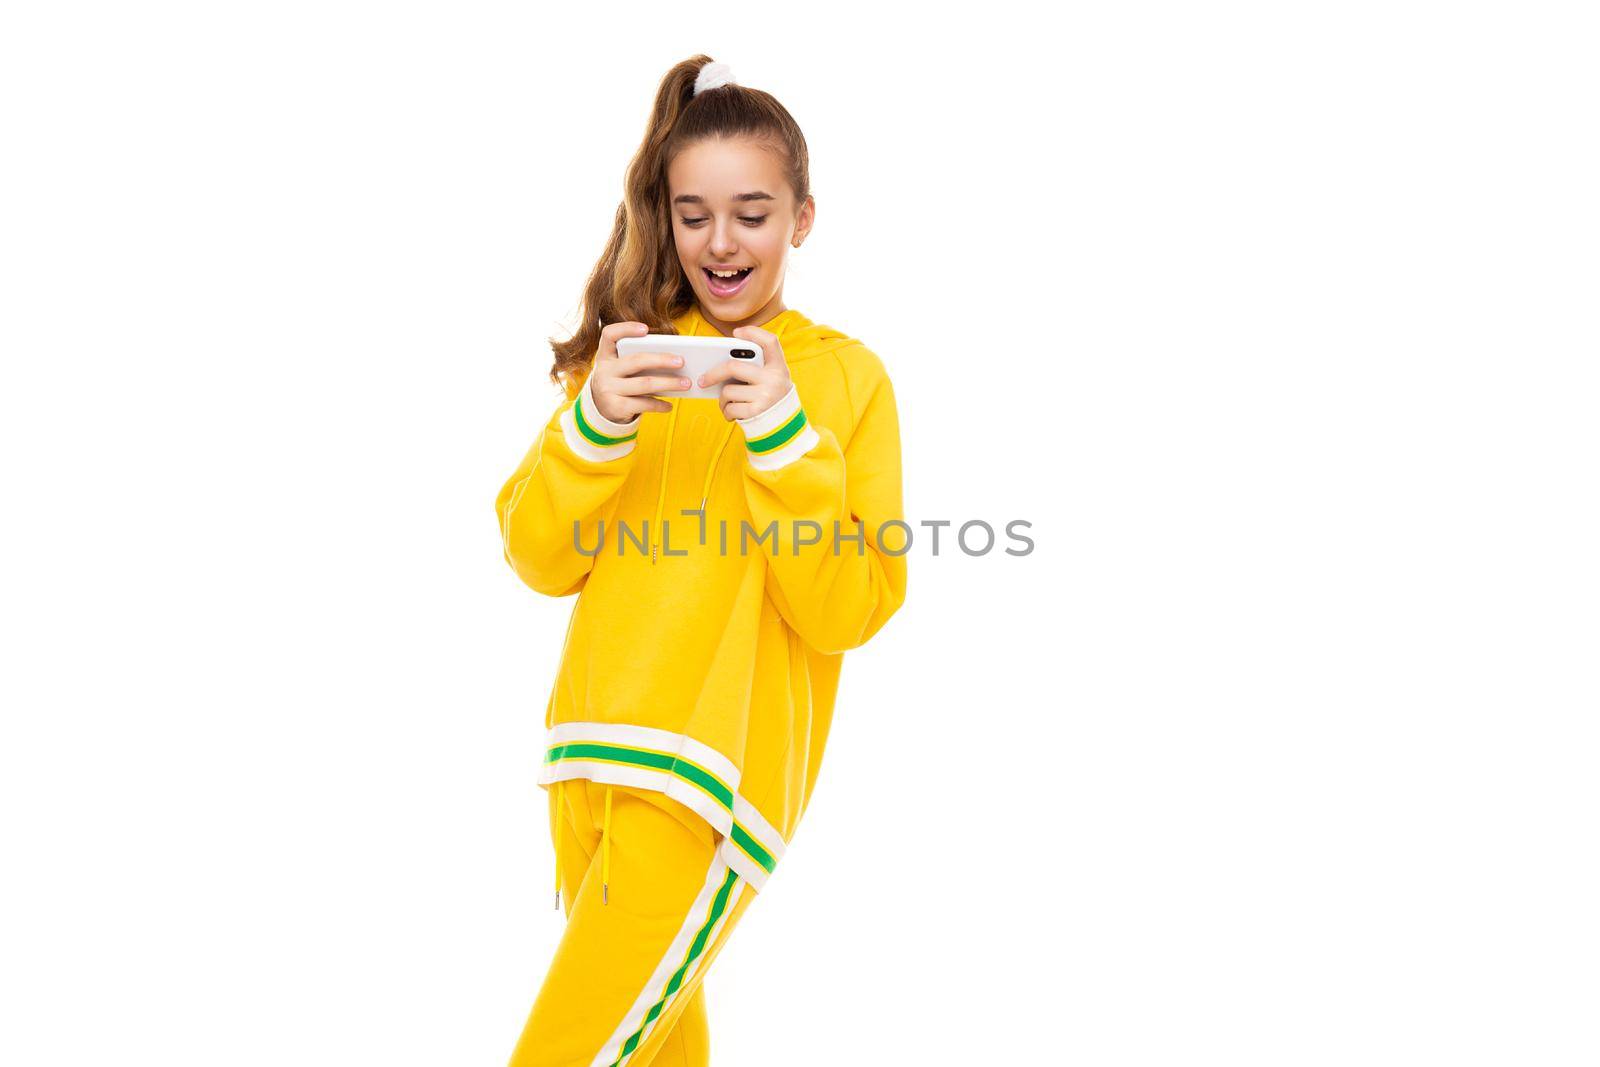 Photo of a beautiful smiling cheerful cute girl with dark hair with a ponytail in a stylish yellow tracksuit with green stripes plays a mobile phone with a white case isolated on a white background with free space for text.